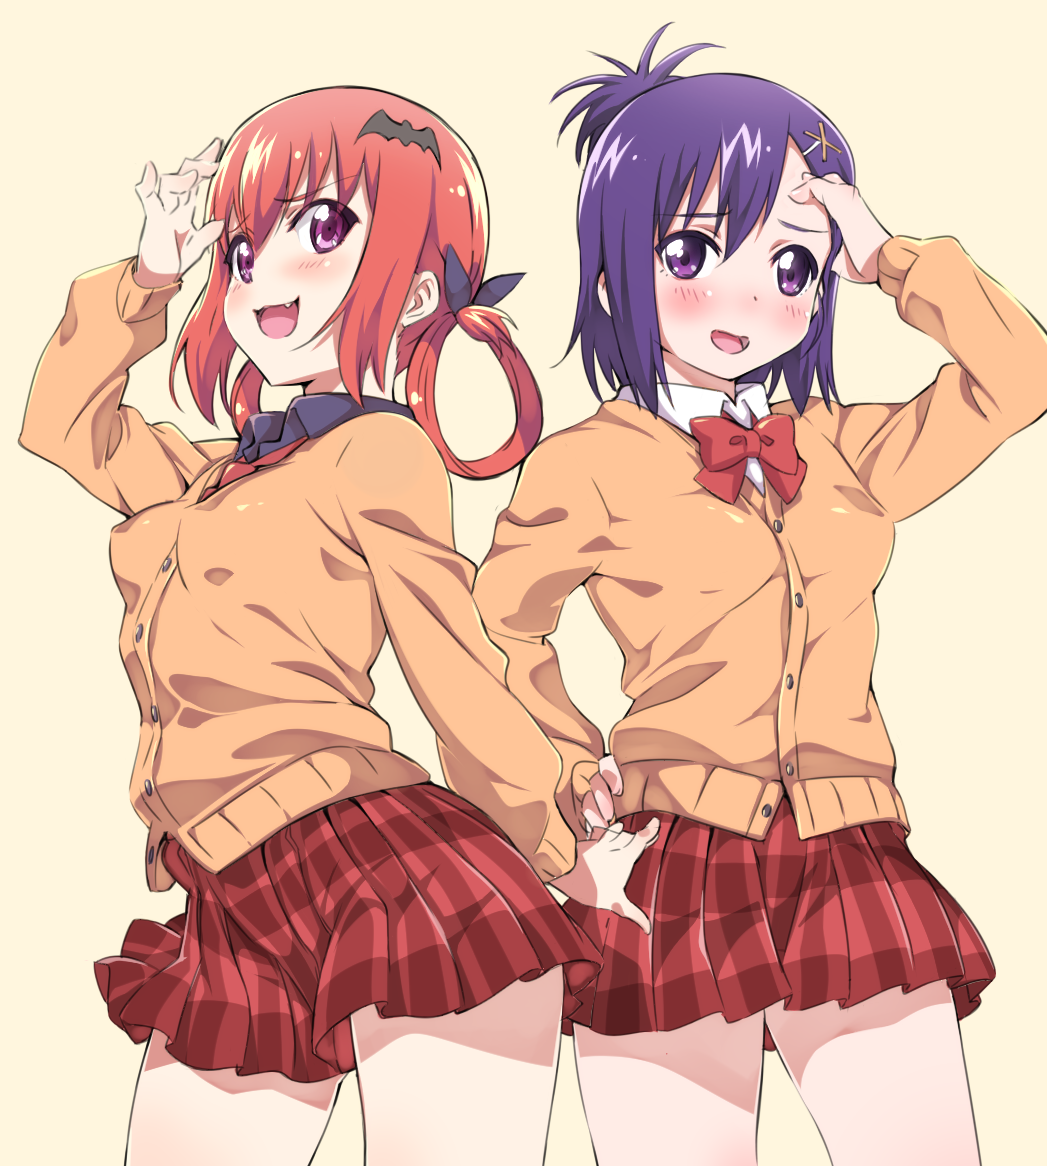 2girls bat_hair_ornament black_shirt blush bow cardigan collared_shirt fang gabriel_dropout hair_ornament hand_on_head hand_on_hip kurumizawa_satanichia_mcdowell long_sleeves multiple_girls necktie niko_(tama) open_mouth pleated_skirt purple_hair red_necktie redhead shirt short_hair simple_background skirt standing tsukinose_vignette_april twintails violet_eyes white_shirt